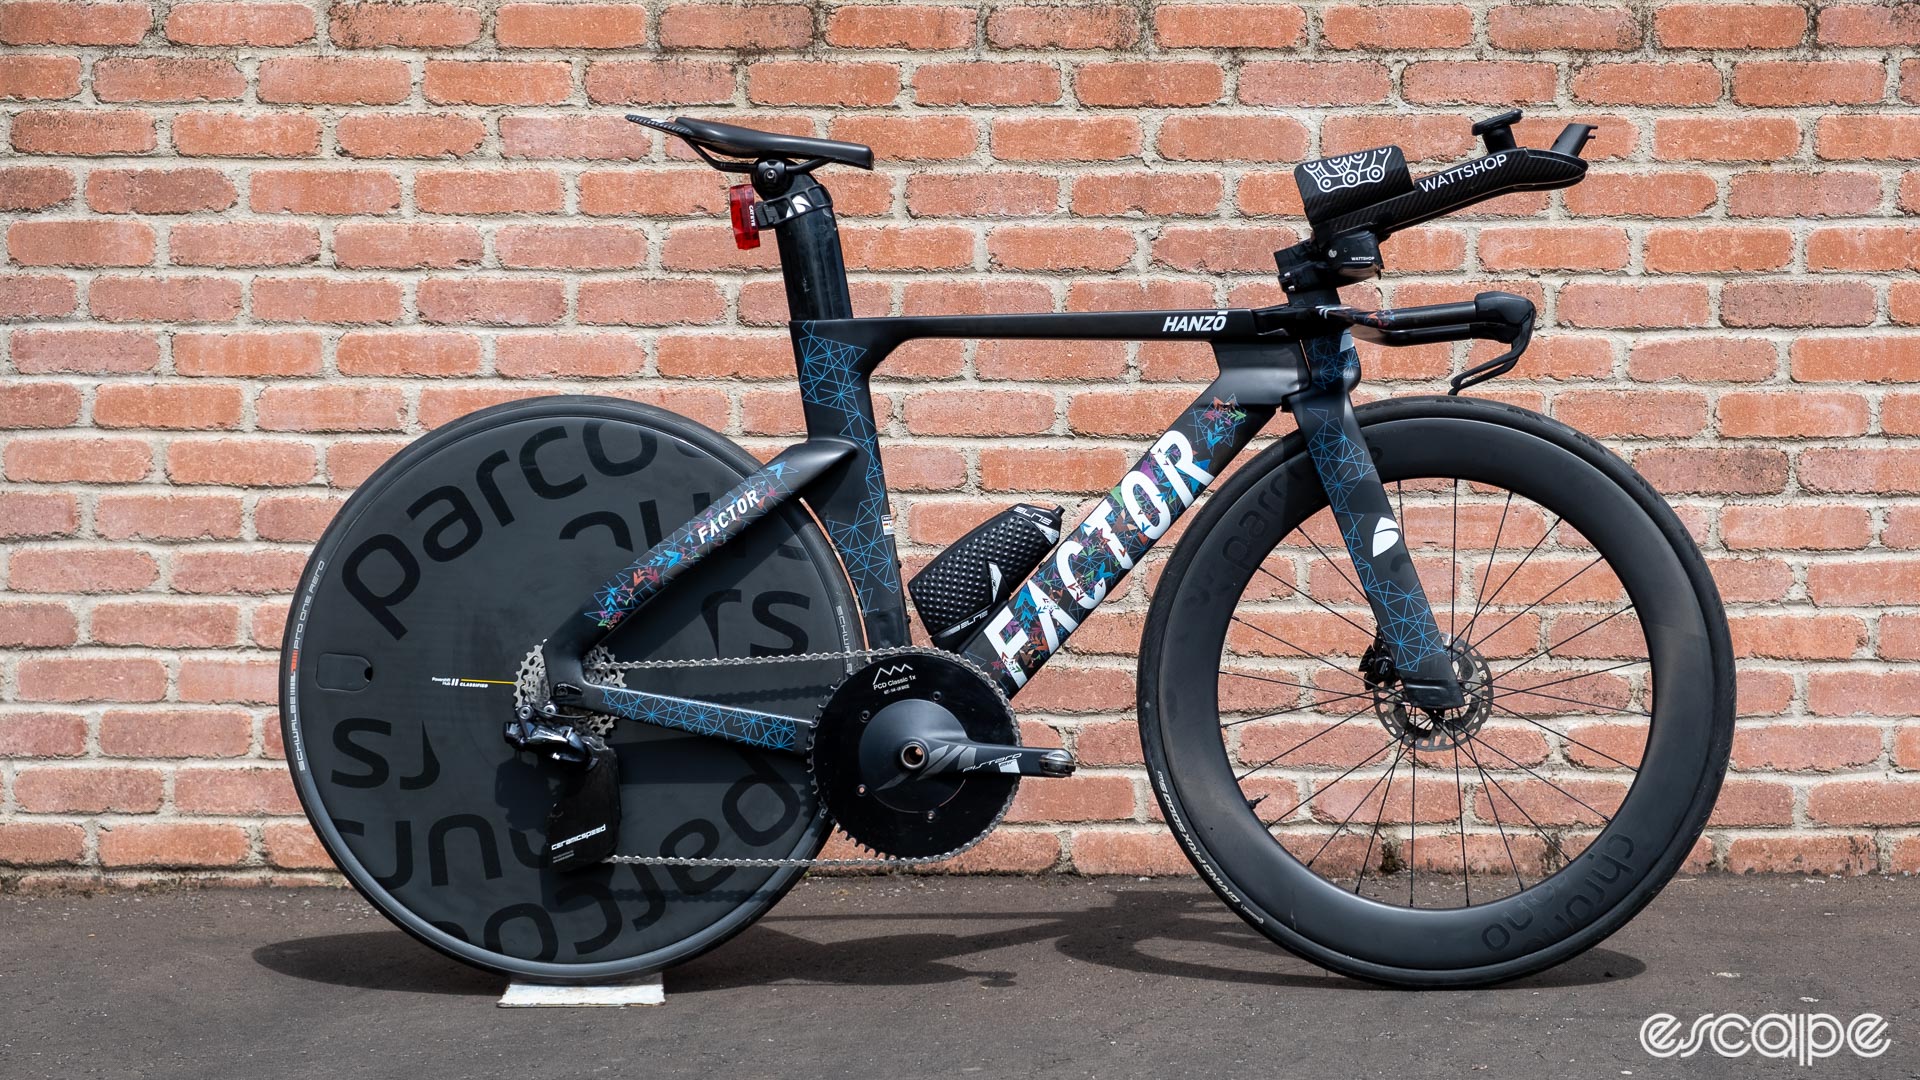 The image shows a Factor Hanzo TT bike with Parcours wheels